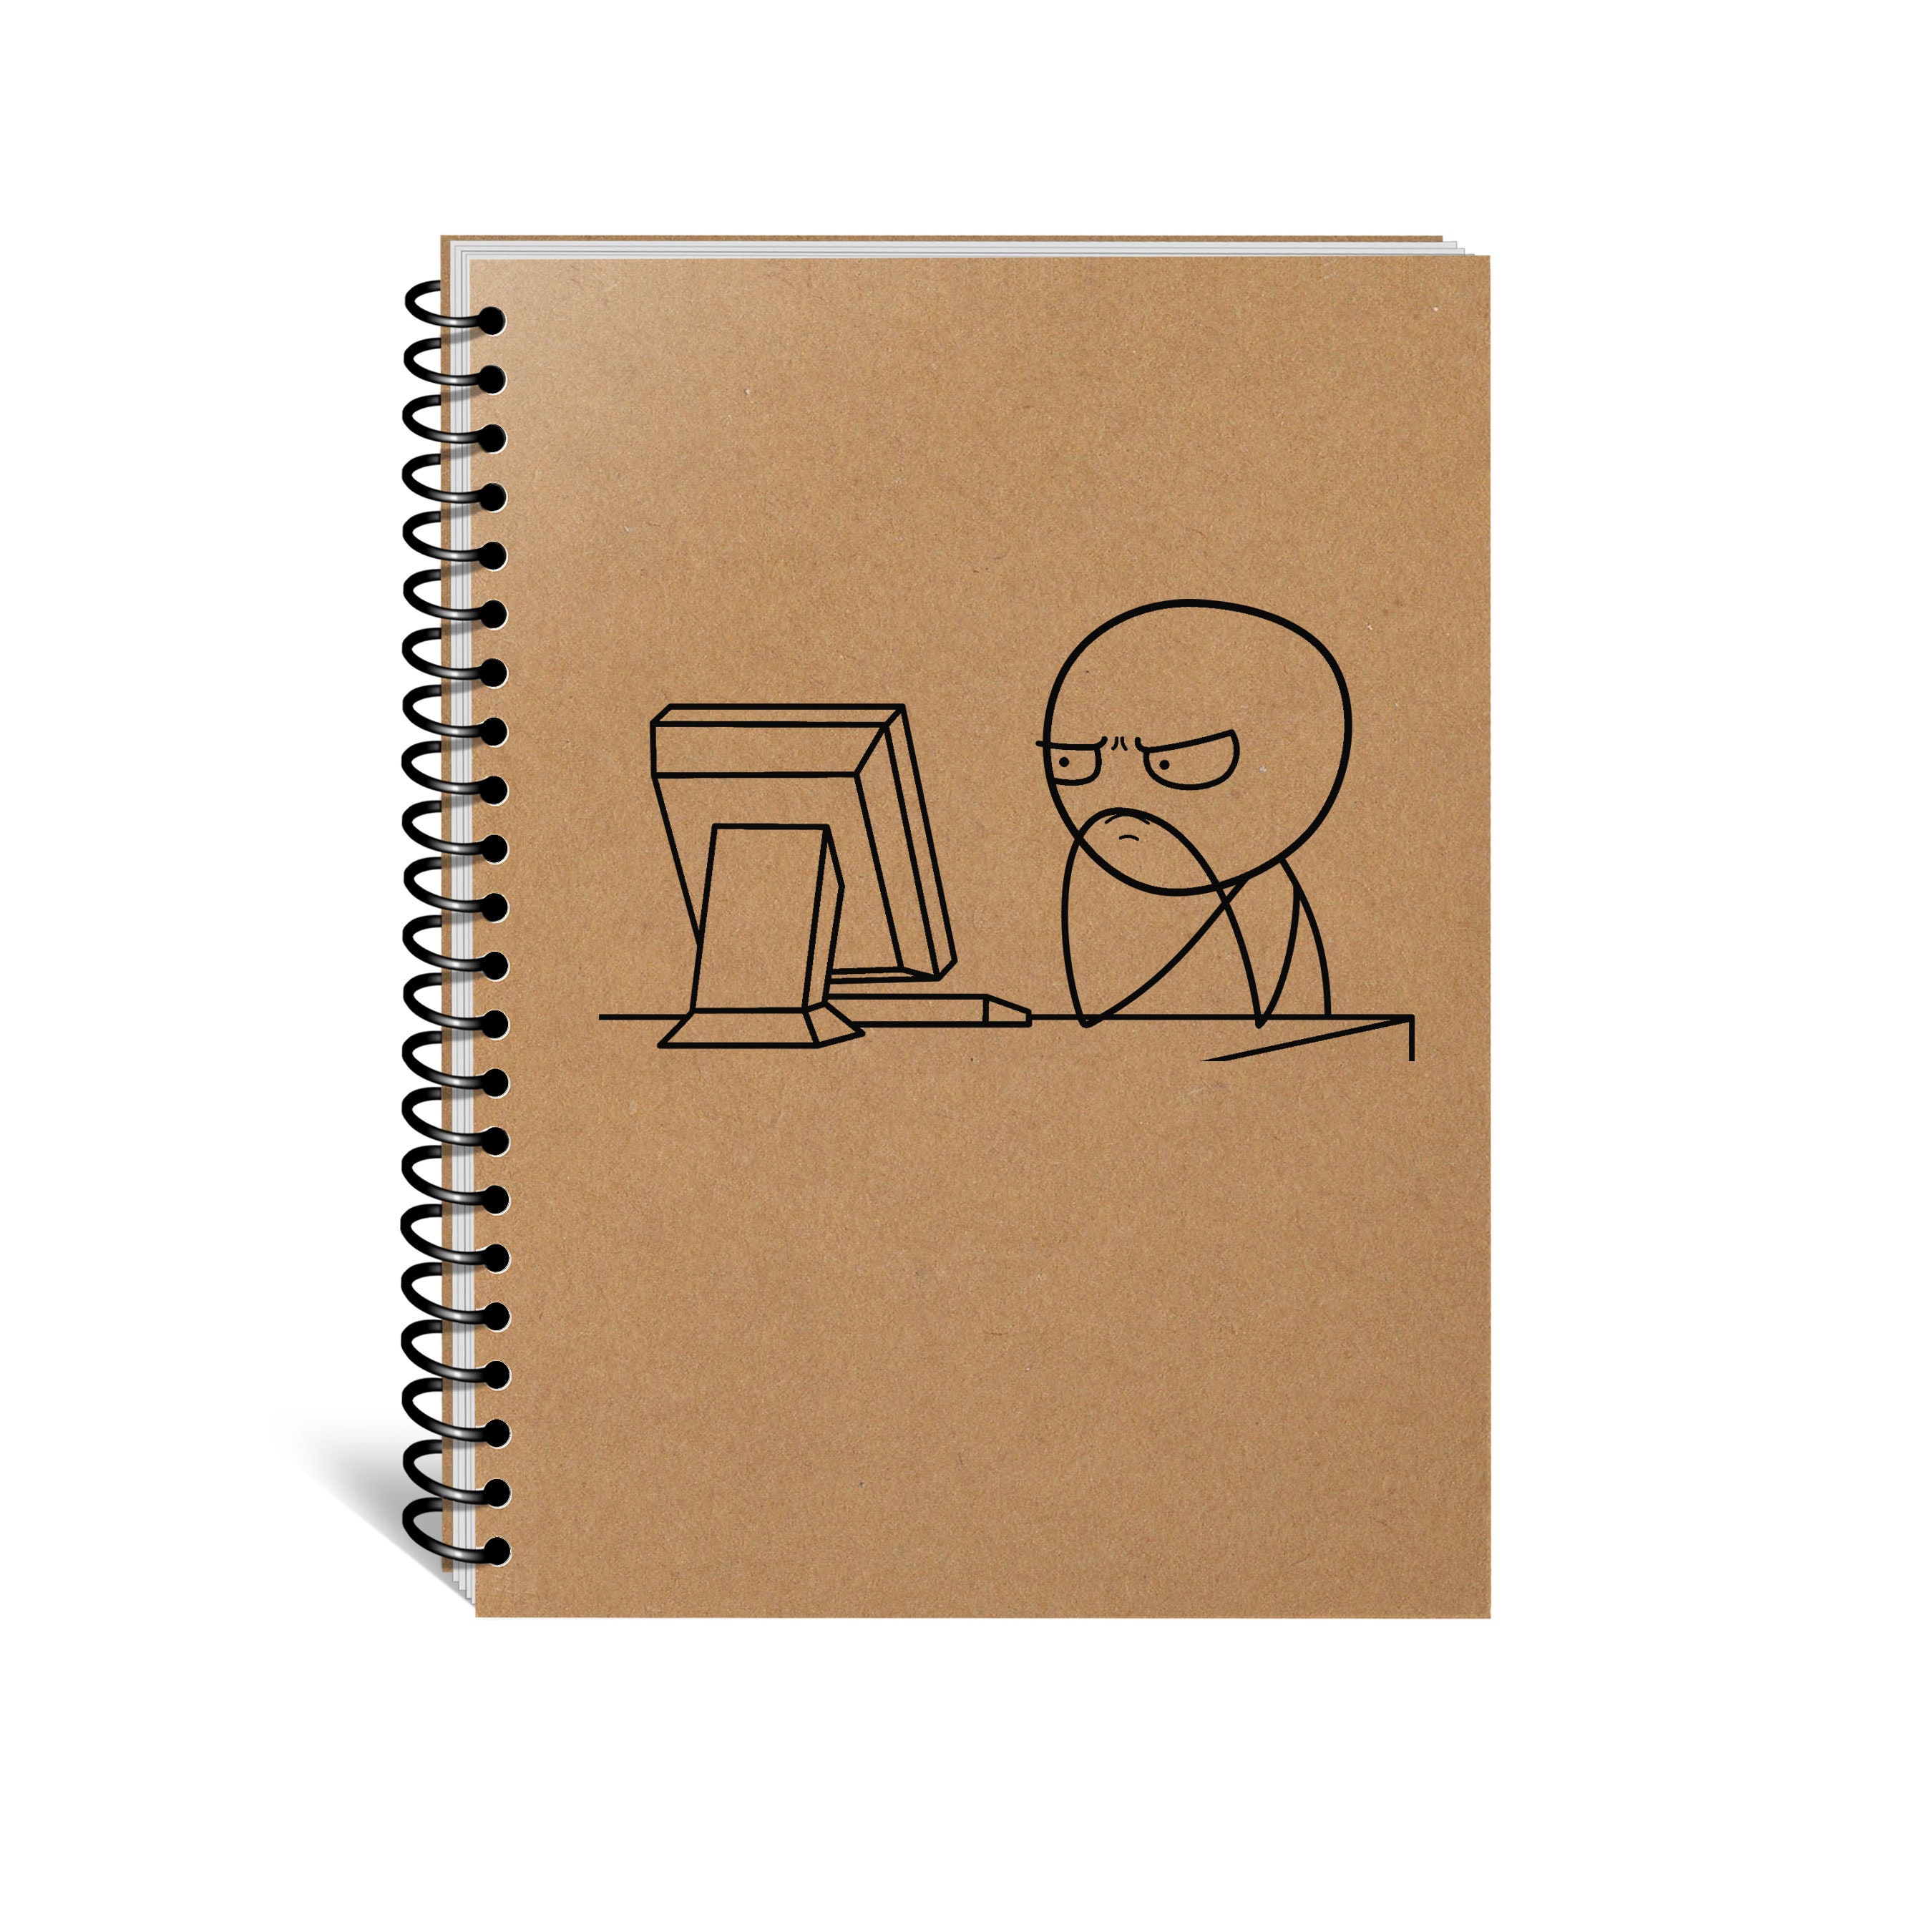 Notepad For Drawing Squid Game, Notepad For Records, Anime Office,  Sketchbook Notepad With The Rings Ring